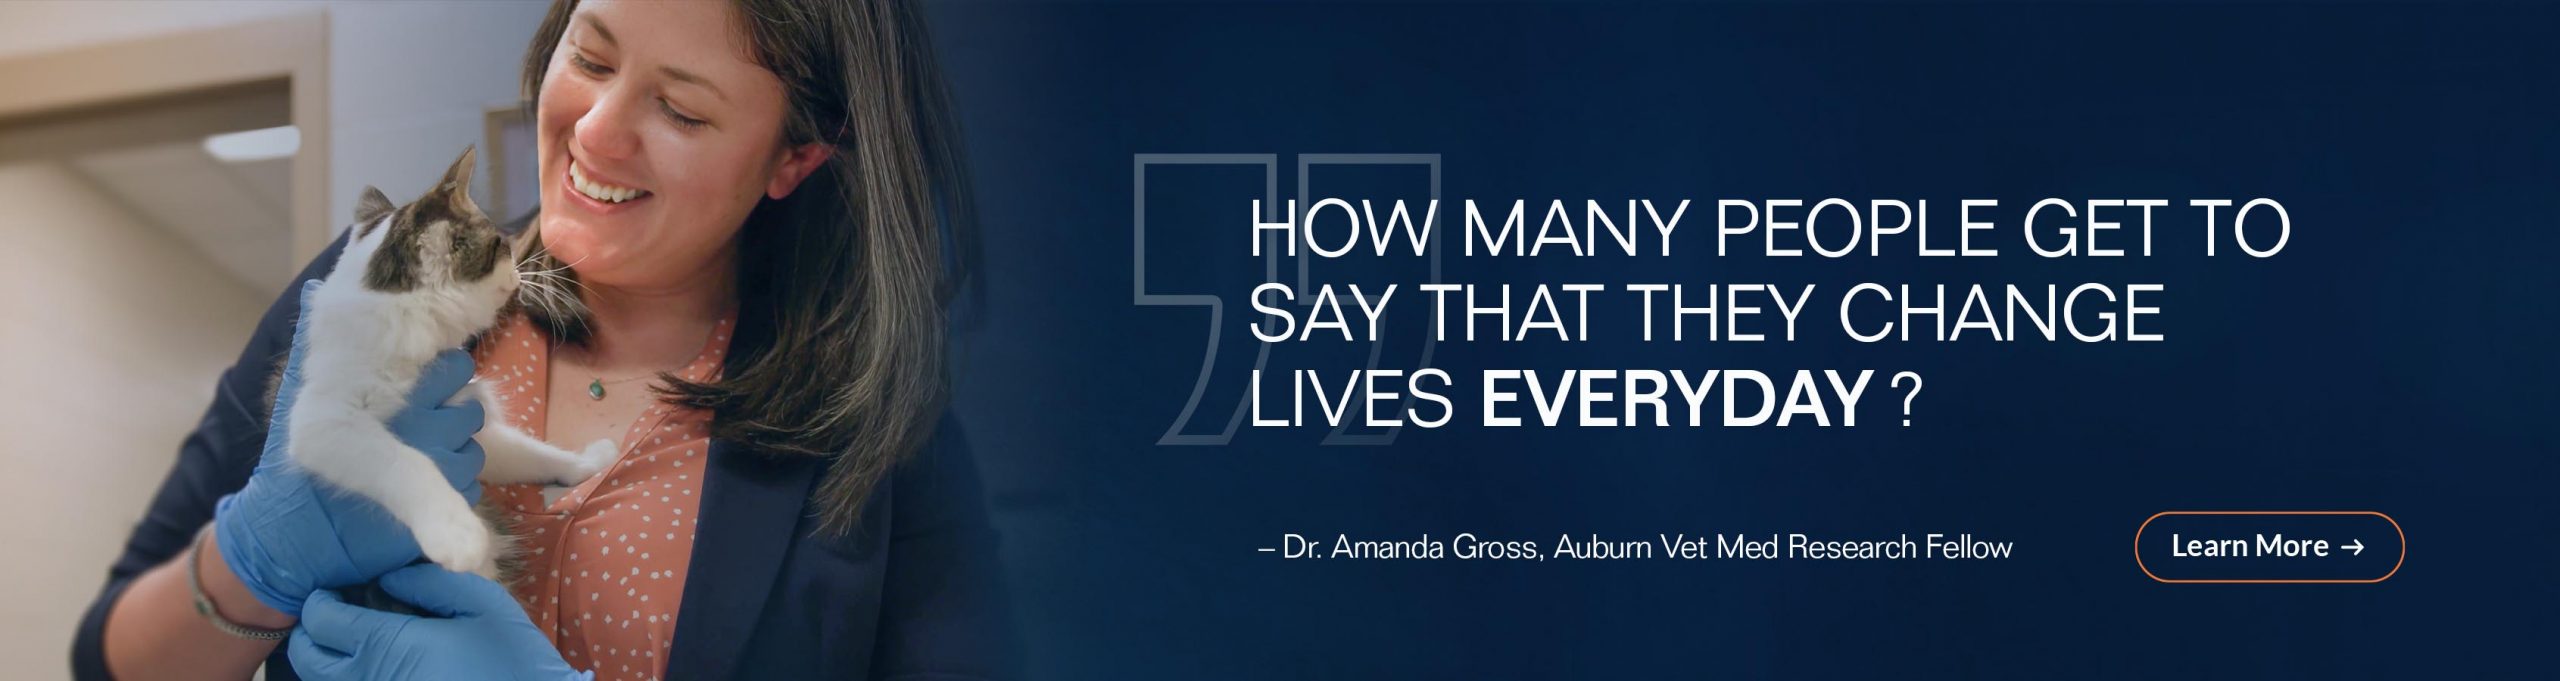 How many people get to say that they change lives evervyday? Dr. Amanda Gross